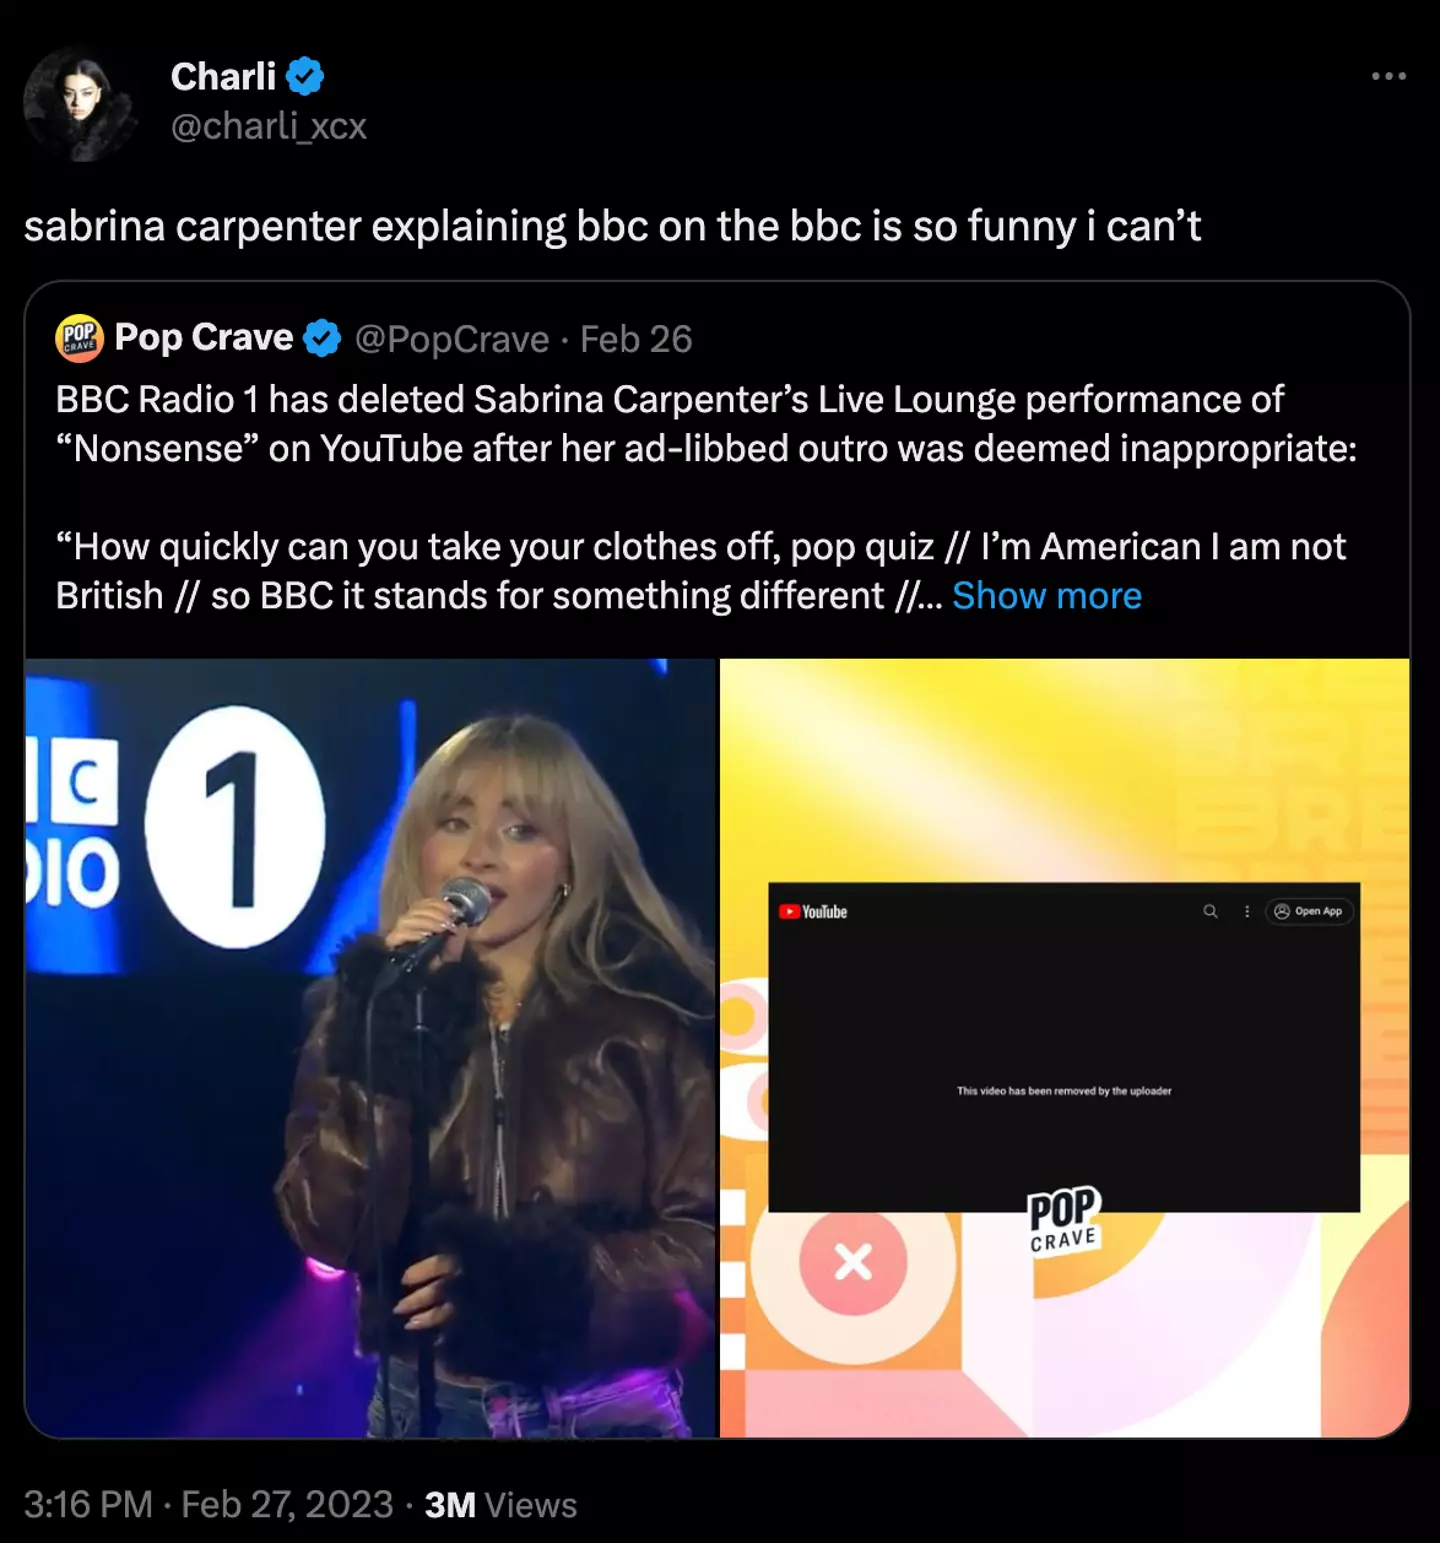 Why did BBC remove Sabrina Carpenter's Live Lounge from ?